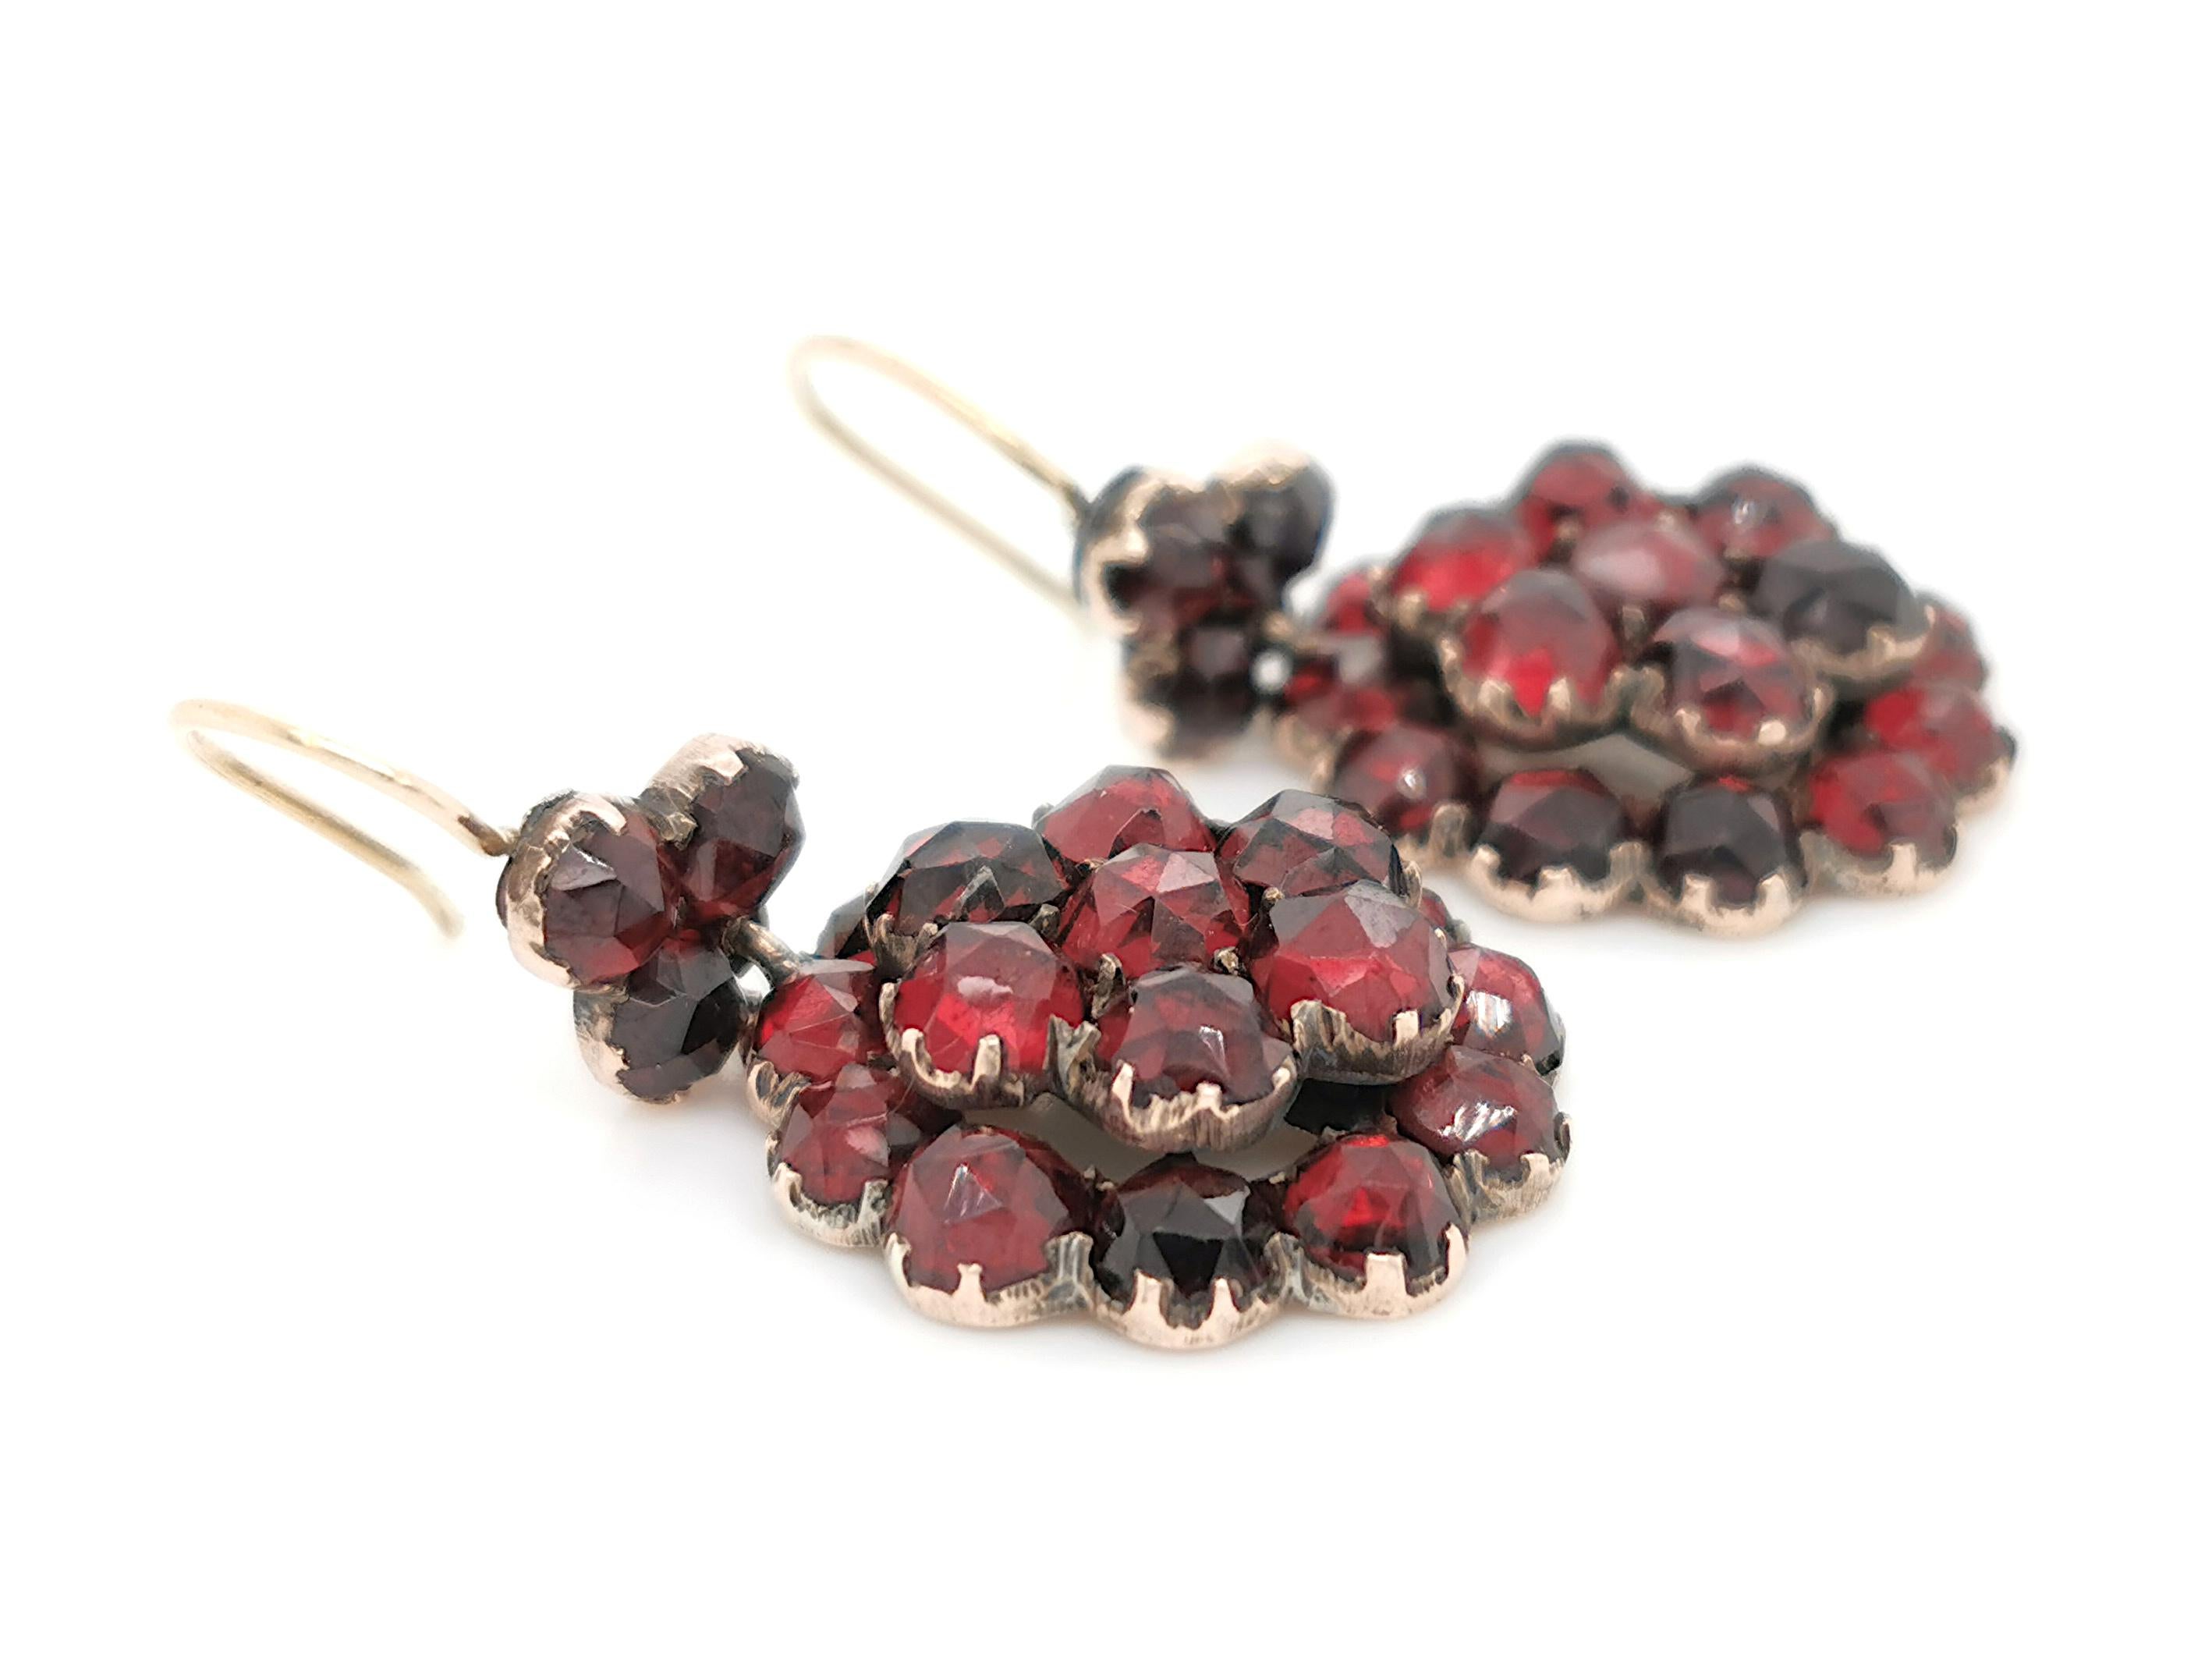 A pair of Bohemian garnet earrings, consisting of a circular cluster of rose cut garnets, suspended from a further trefoil of rose cut garnets, in closed back settings, mounted in silver-gilt, with gold French wire fittings, circa 1880.